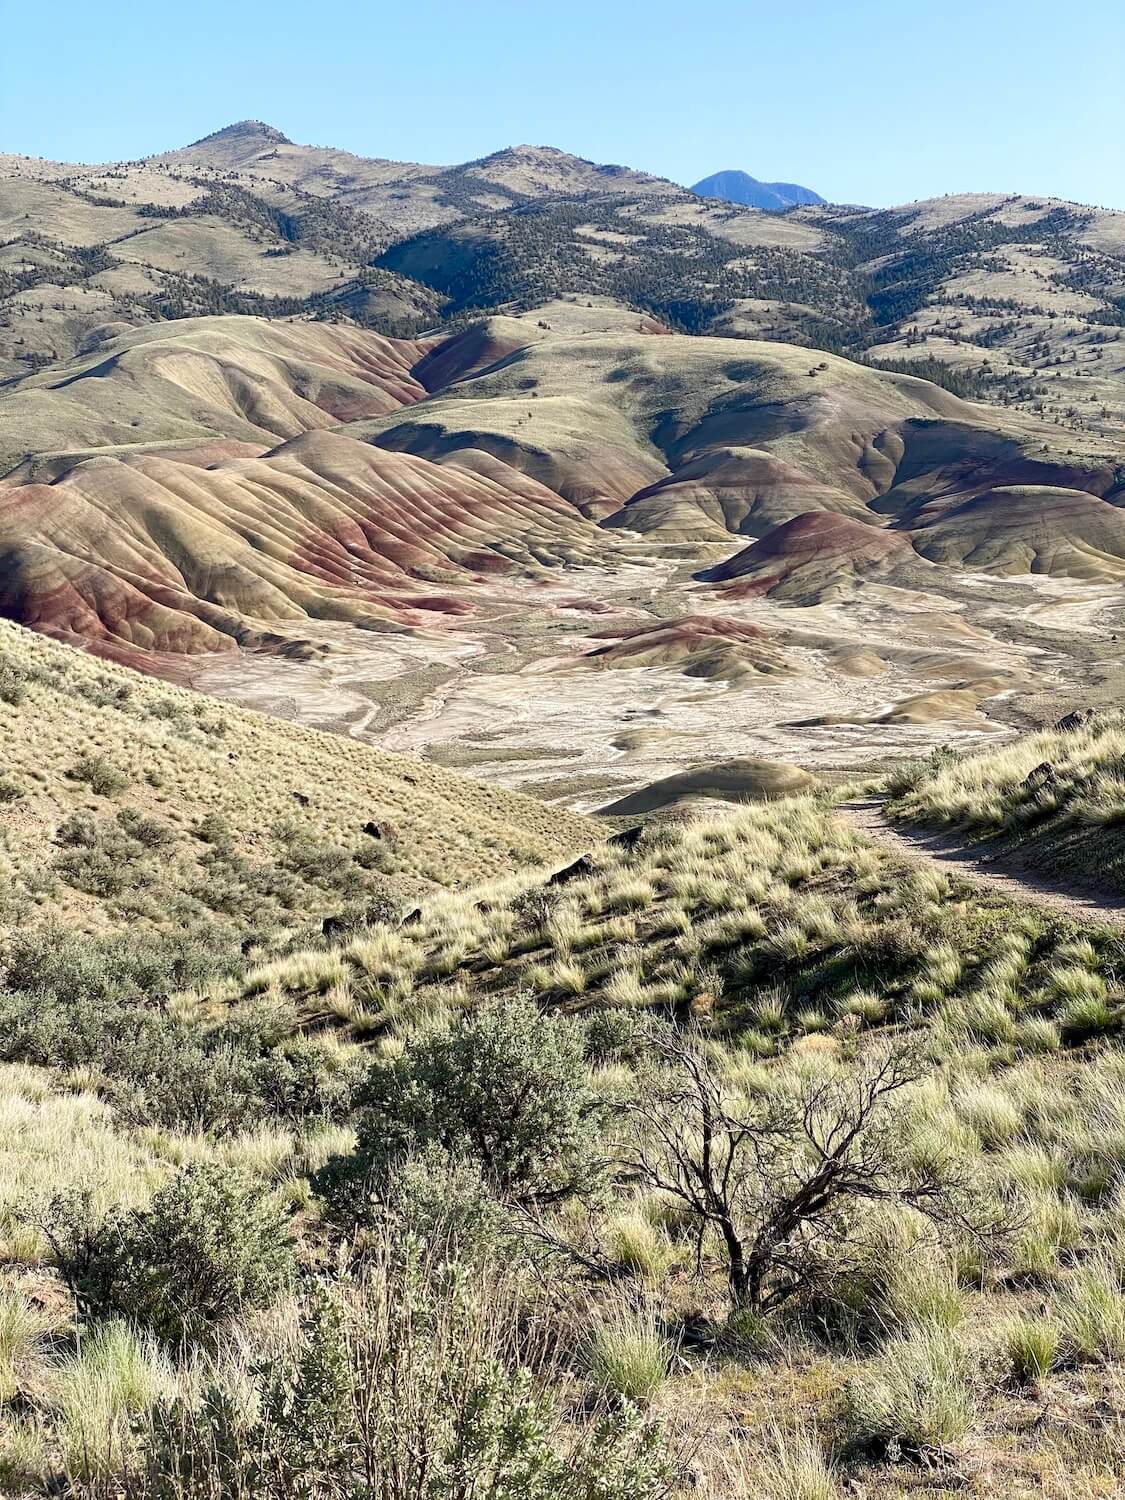 The beautiful flowing hills of the Painted Desert serve up layers of yellow, red, orange, gold and green in a flowing landscape that makes this photo pop.